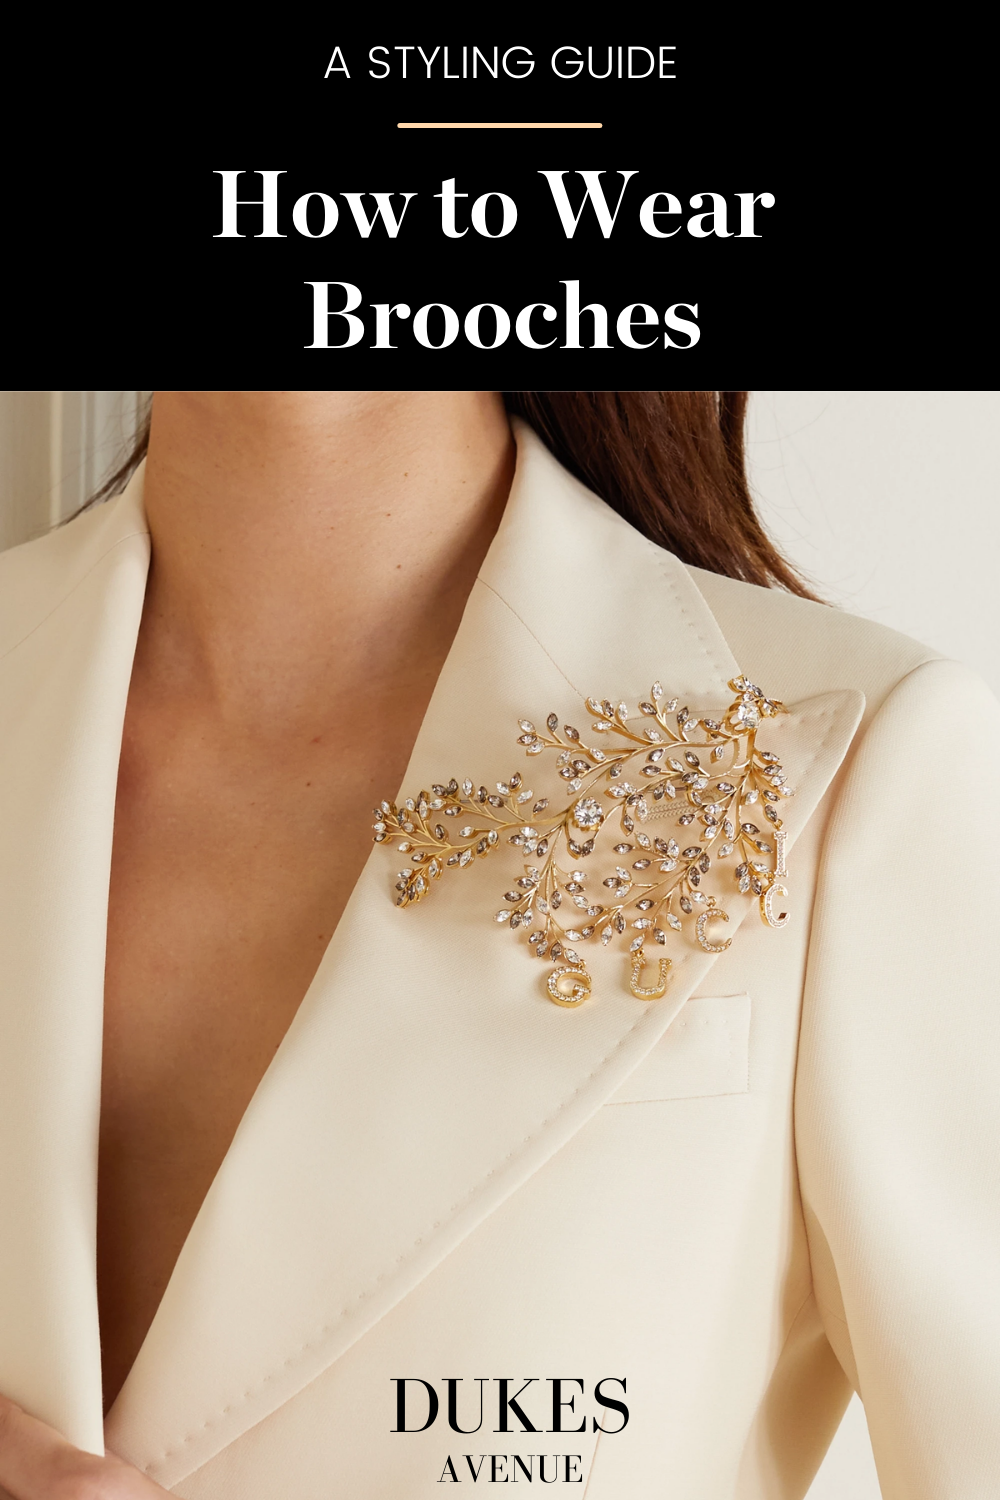 A woman wearing a big gold brooch with diamonds on a light pink blazer with text overlay "A styling guide - how to wear brooches"